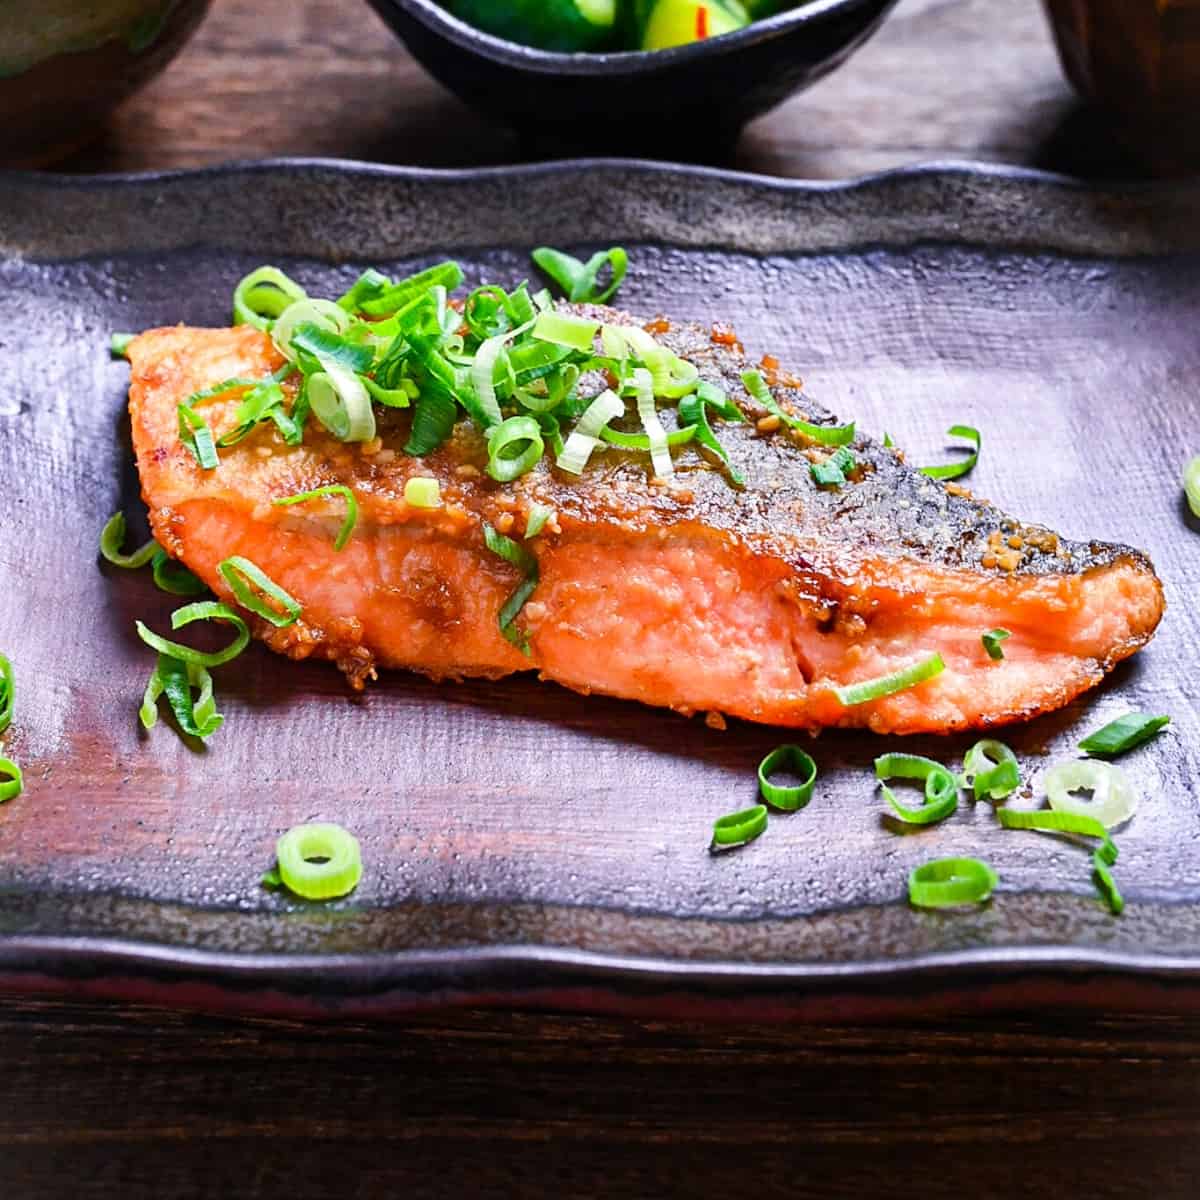 Miso glazed salmon (pan fried) served on a brown rectangular plate and sprinkled with spring onions